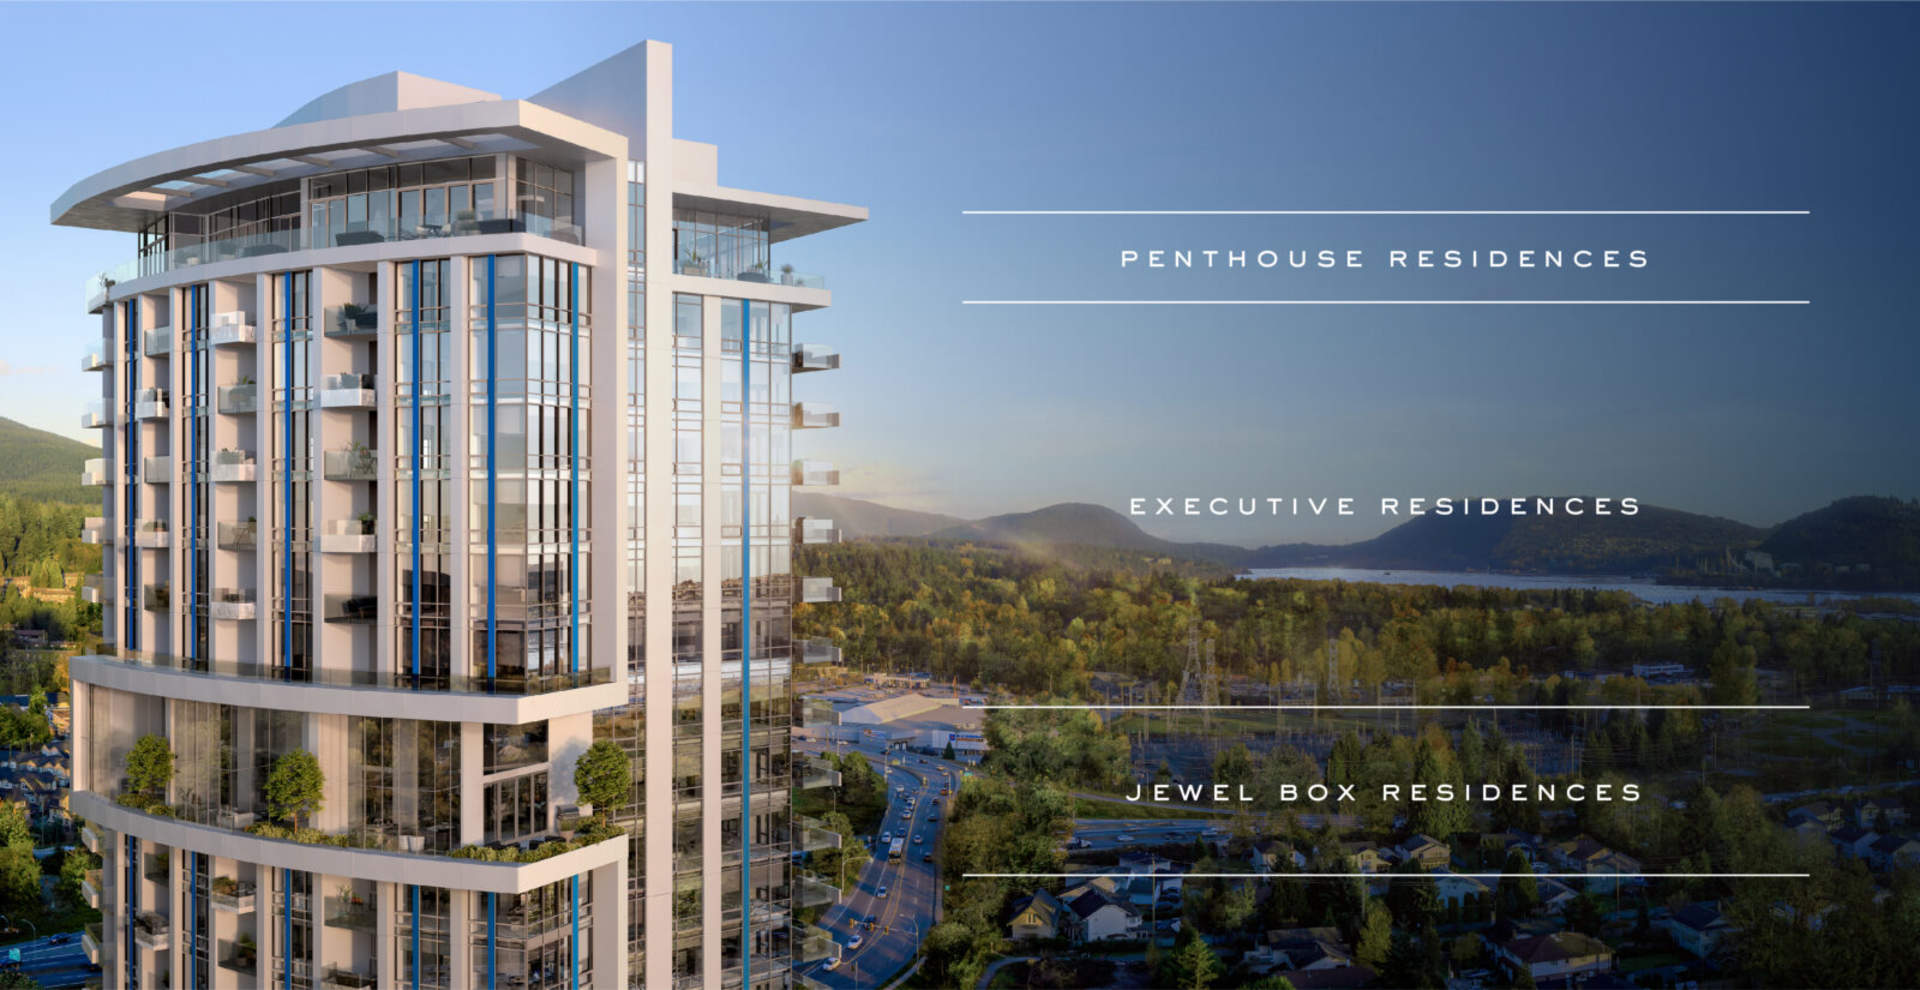 Premier Sky Home at the Jewel Box Residences in the Denna Collection